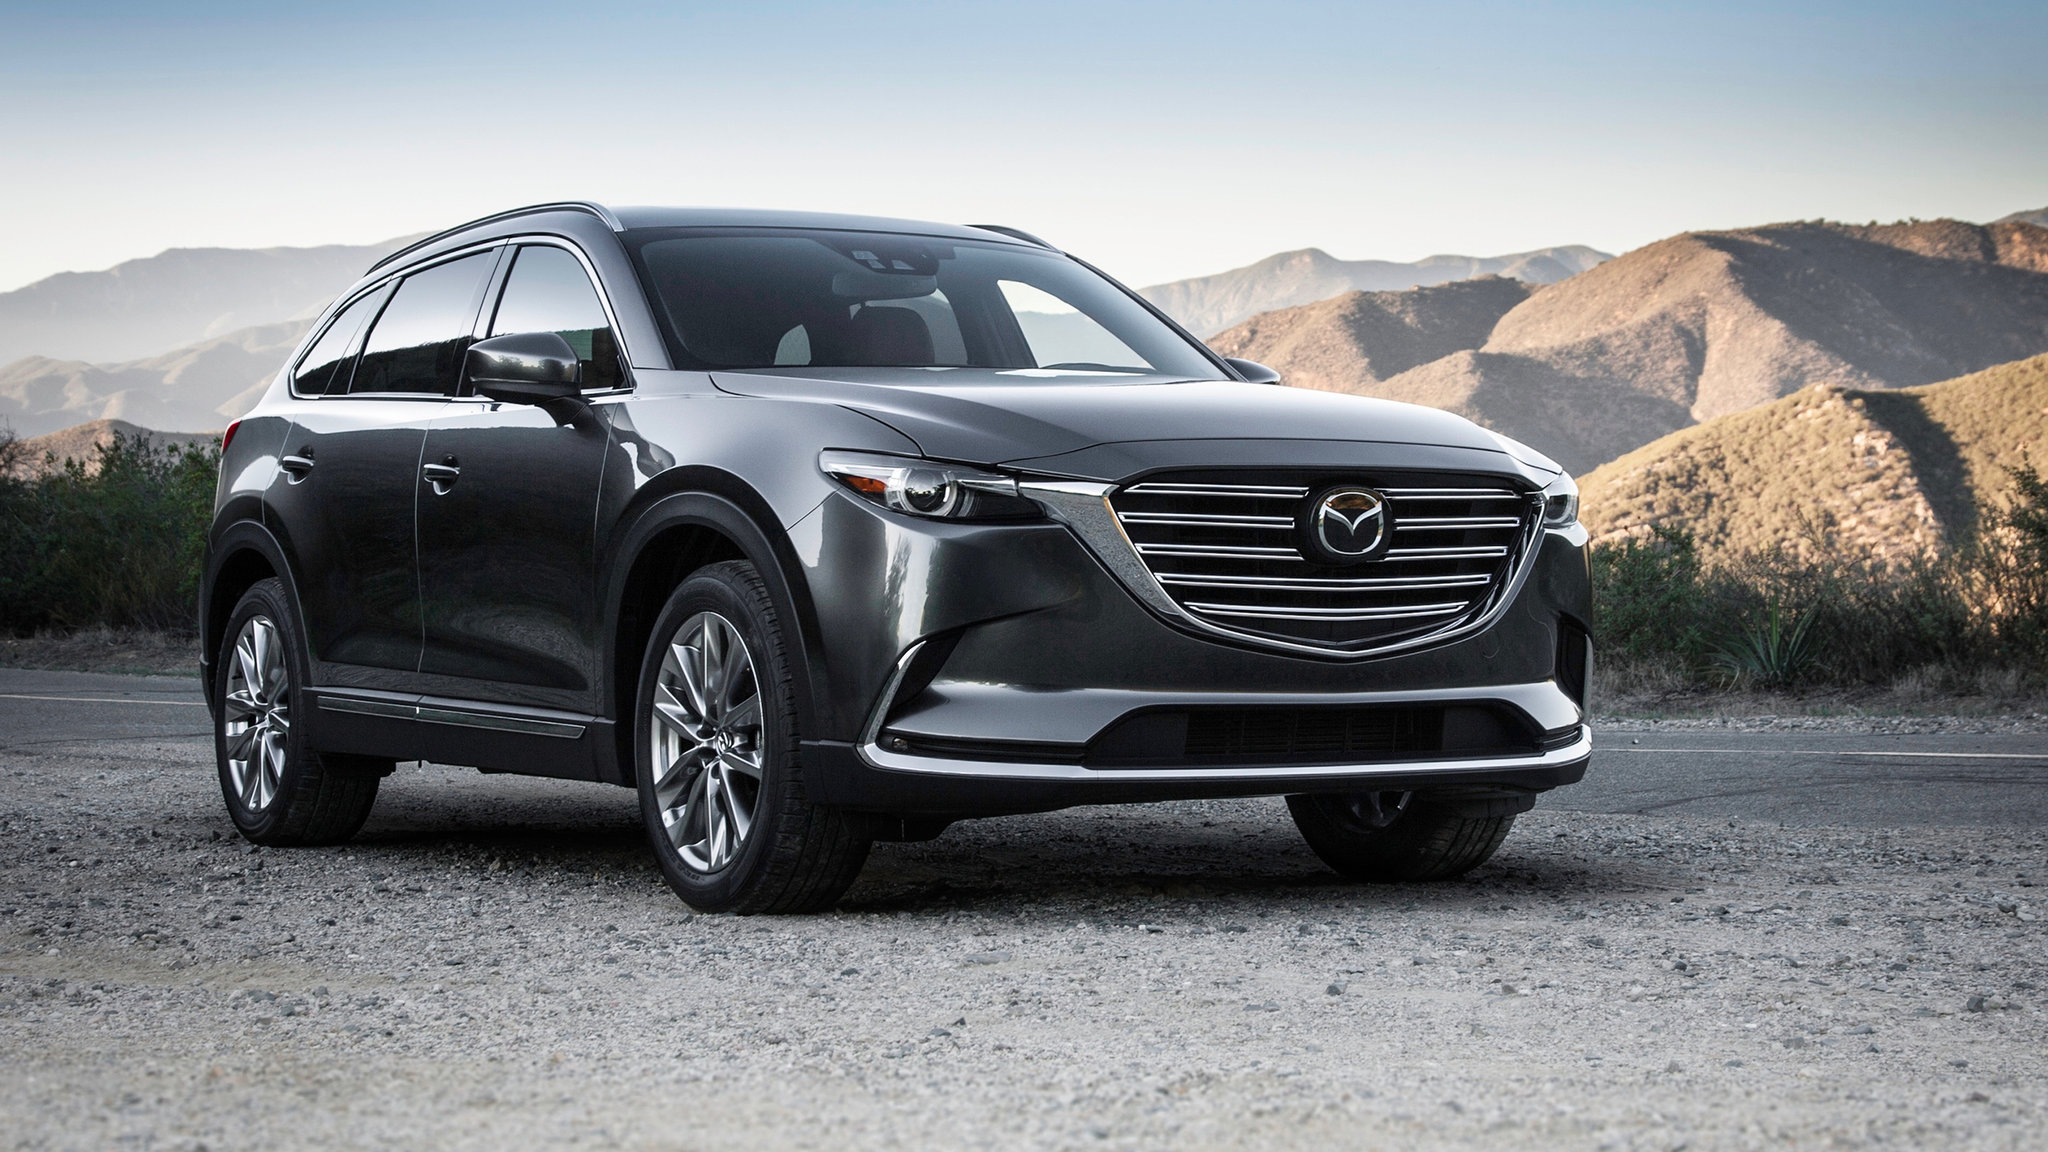 Mazda's CX-9: A Crossover That's a Treat for Parents - The New York Times